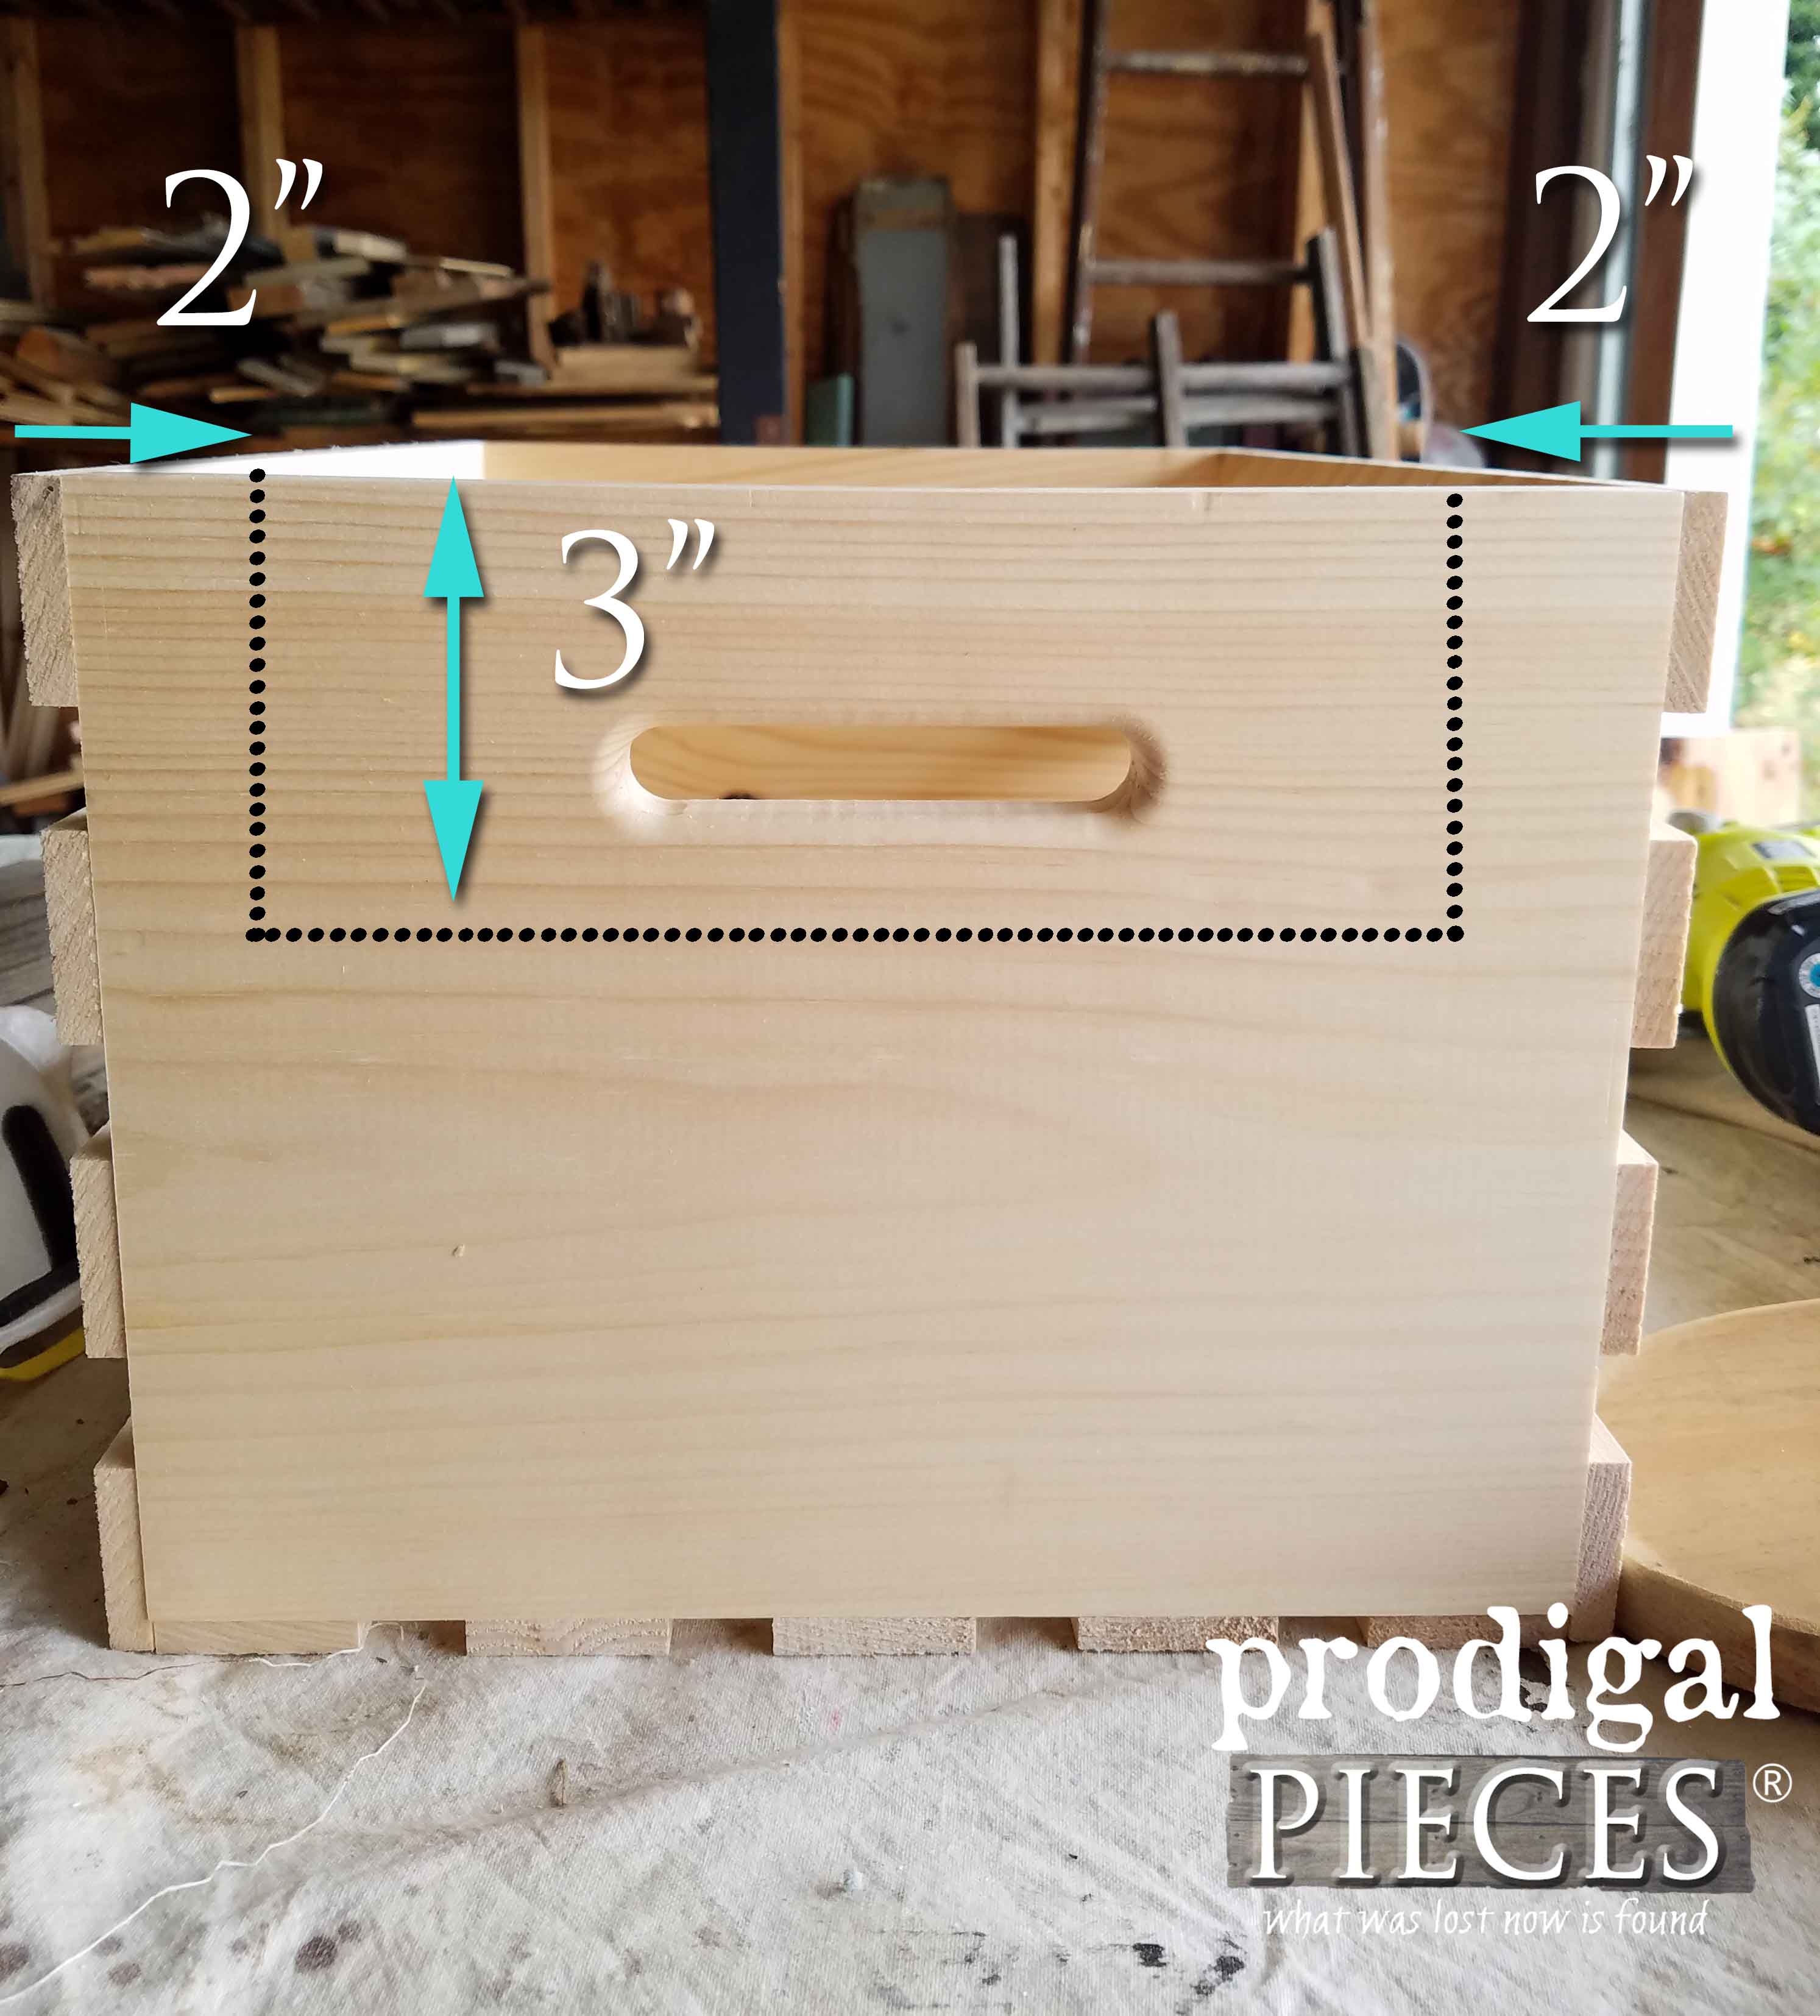 Cut Template for Crate Wagon by Prodigal Pieces | prodigalpieces.com